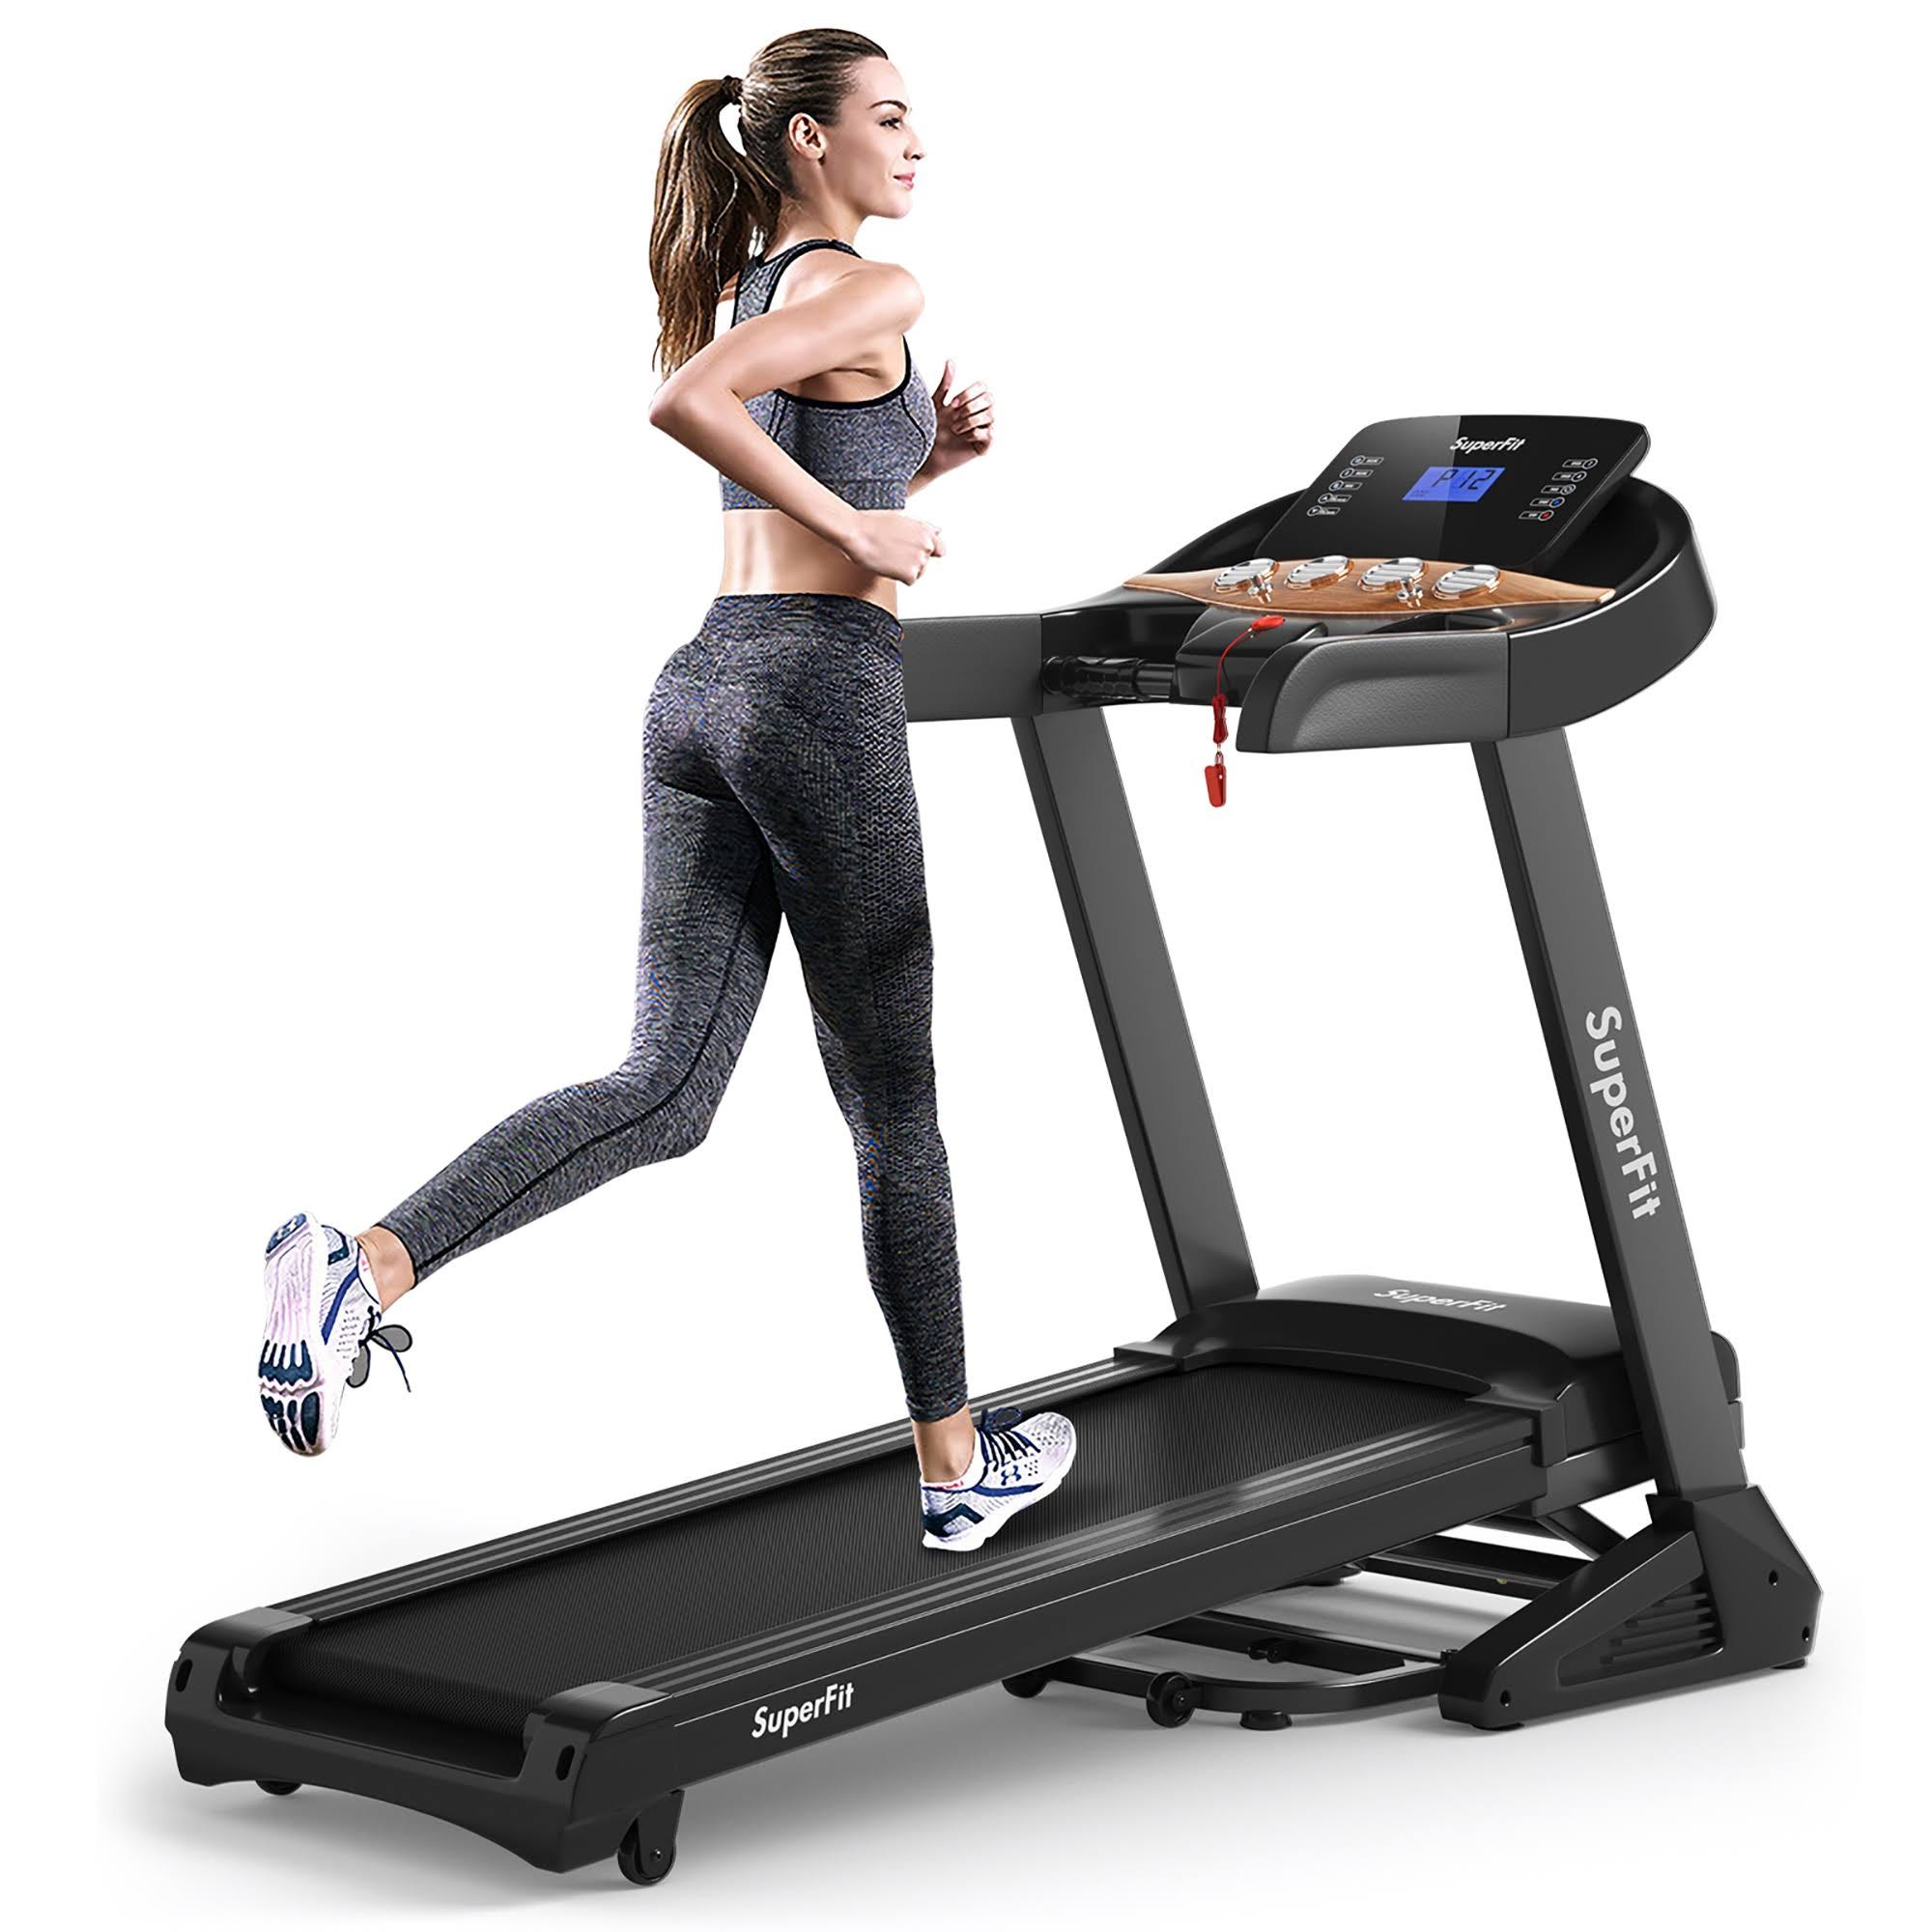 SuperFit 3.75HP Electric Folding Treadmill with Auto Incline & 12 Programs | Image